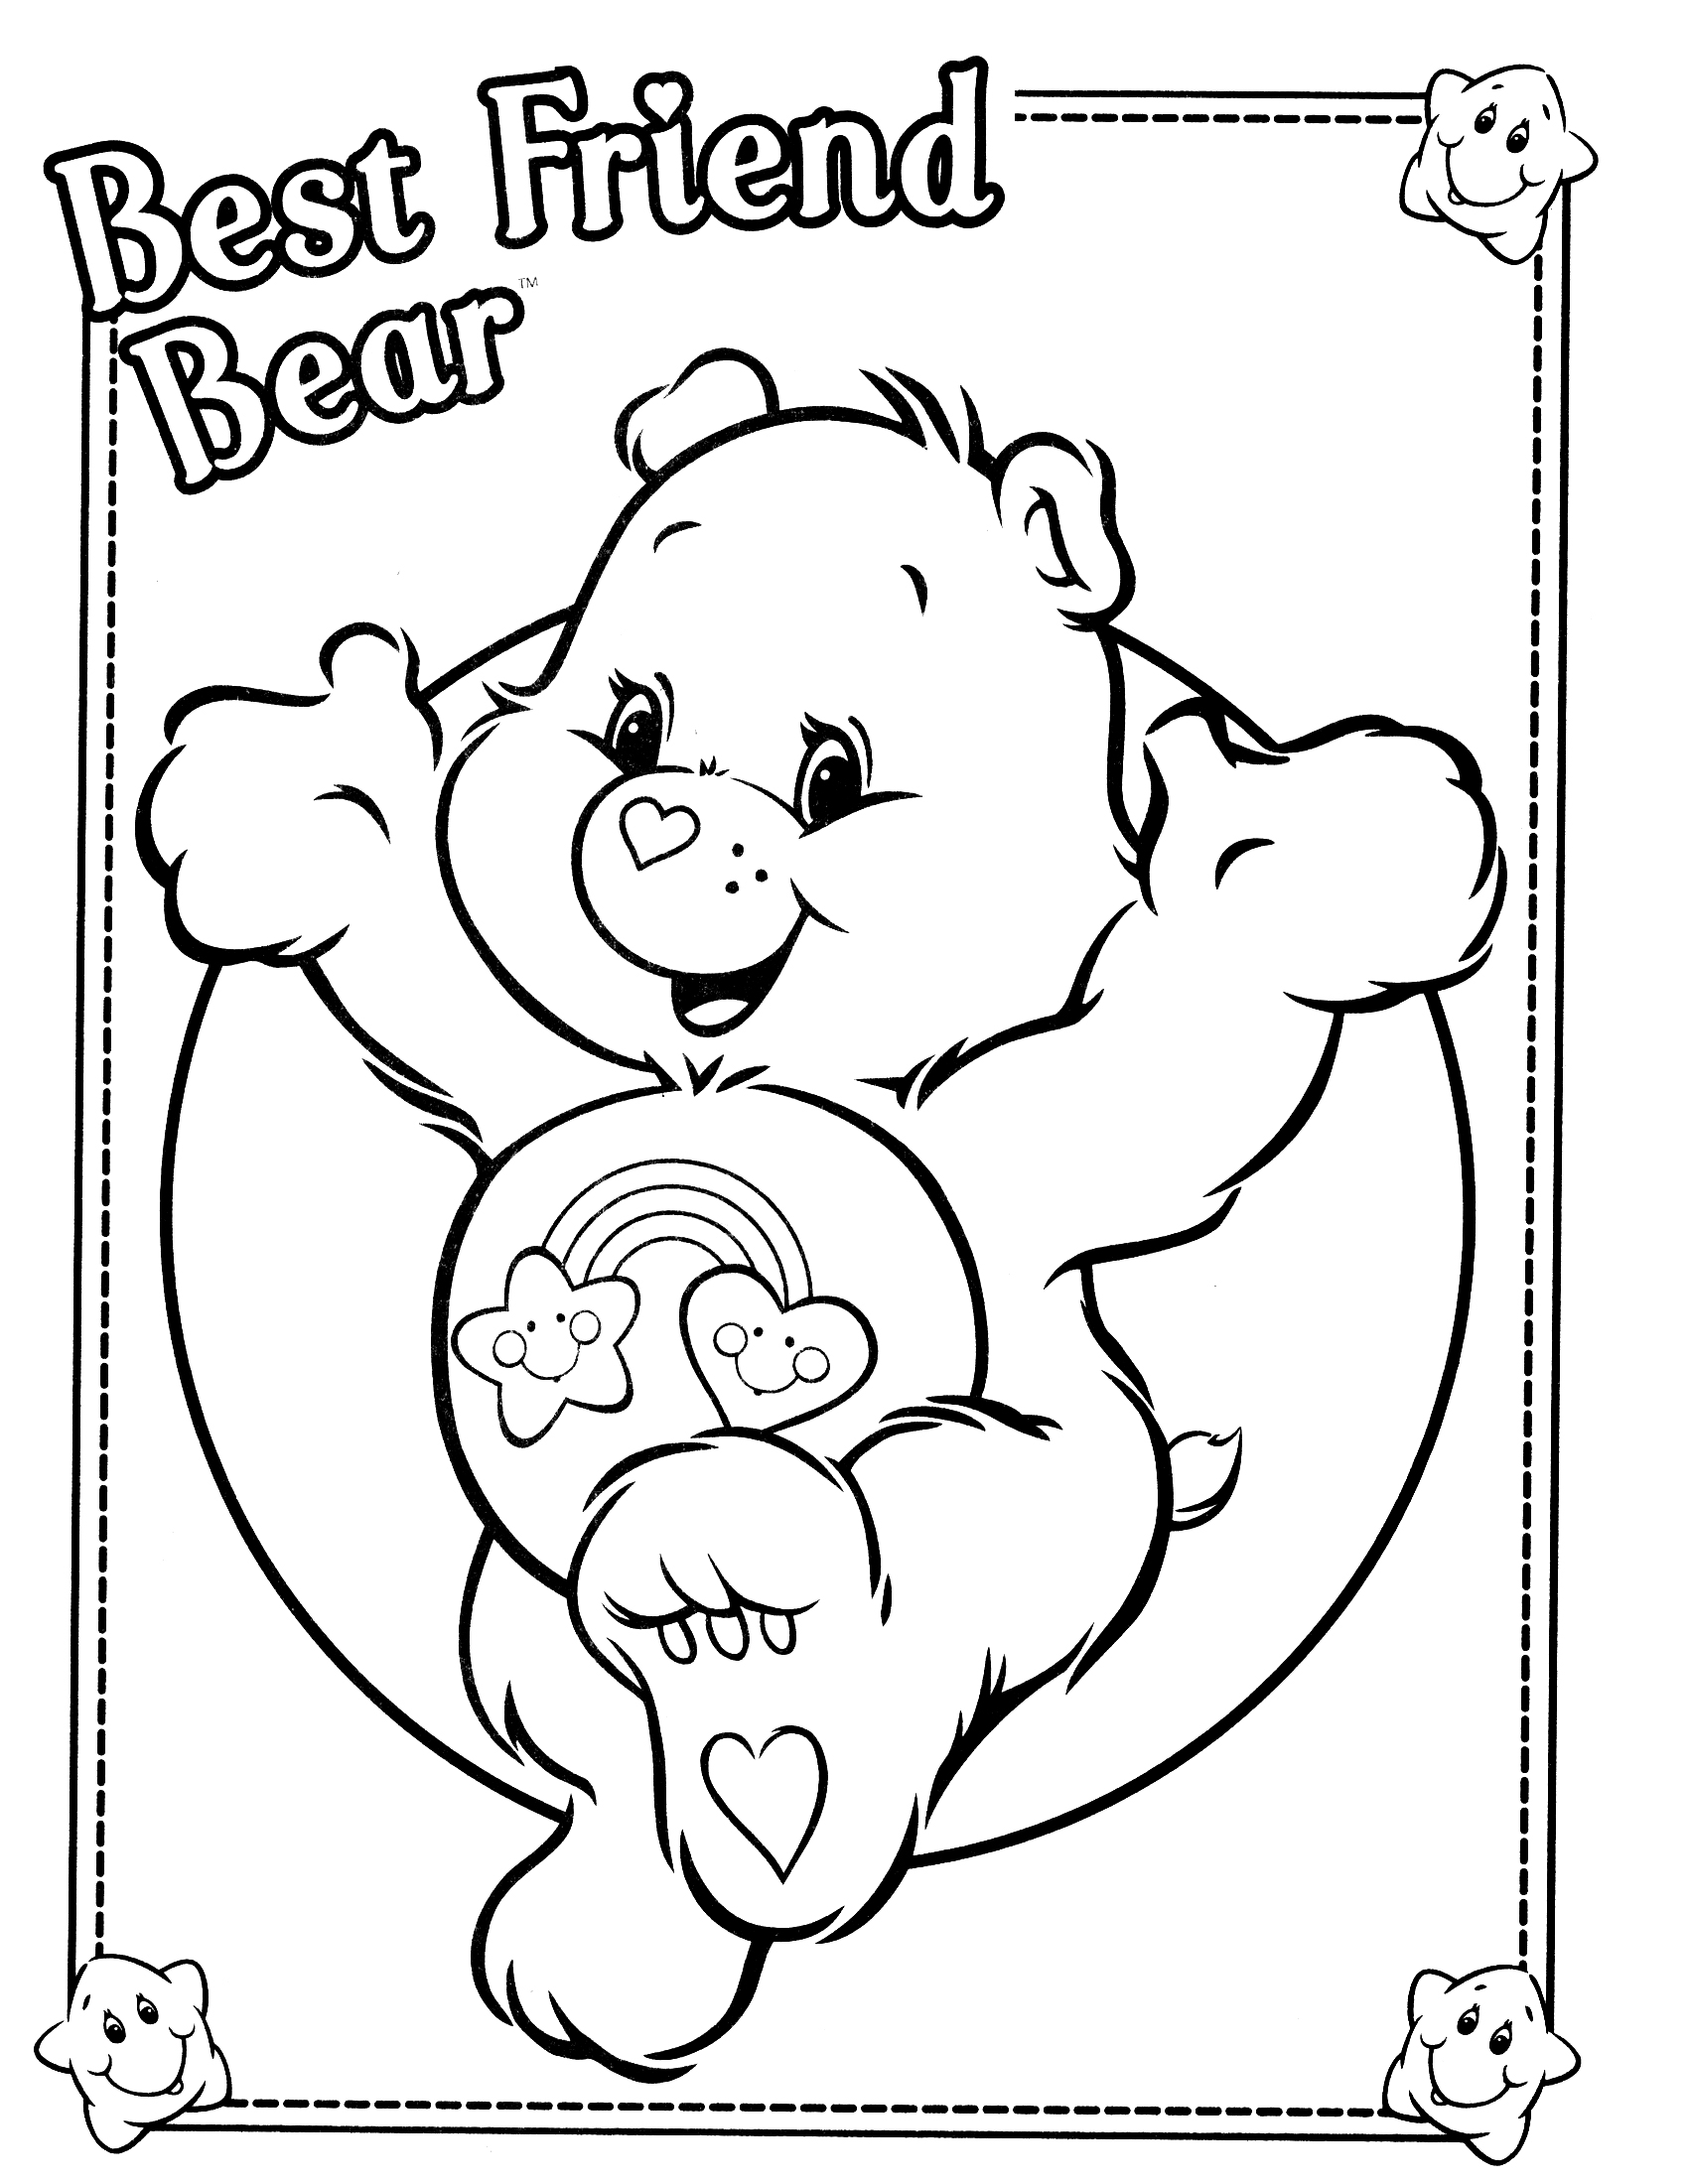 Baby Care Bears Coloring Pages at GetColorings.com | Free printable